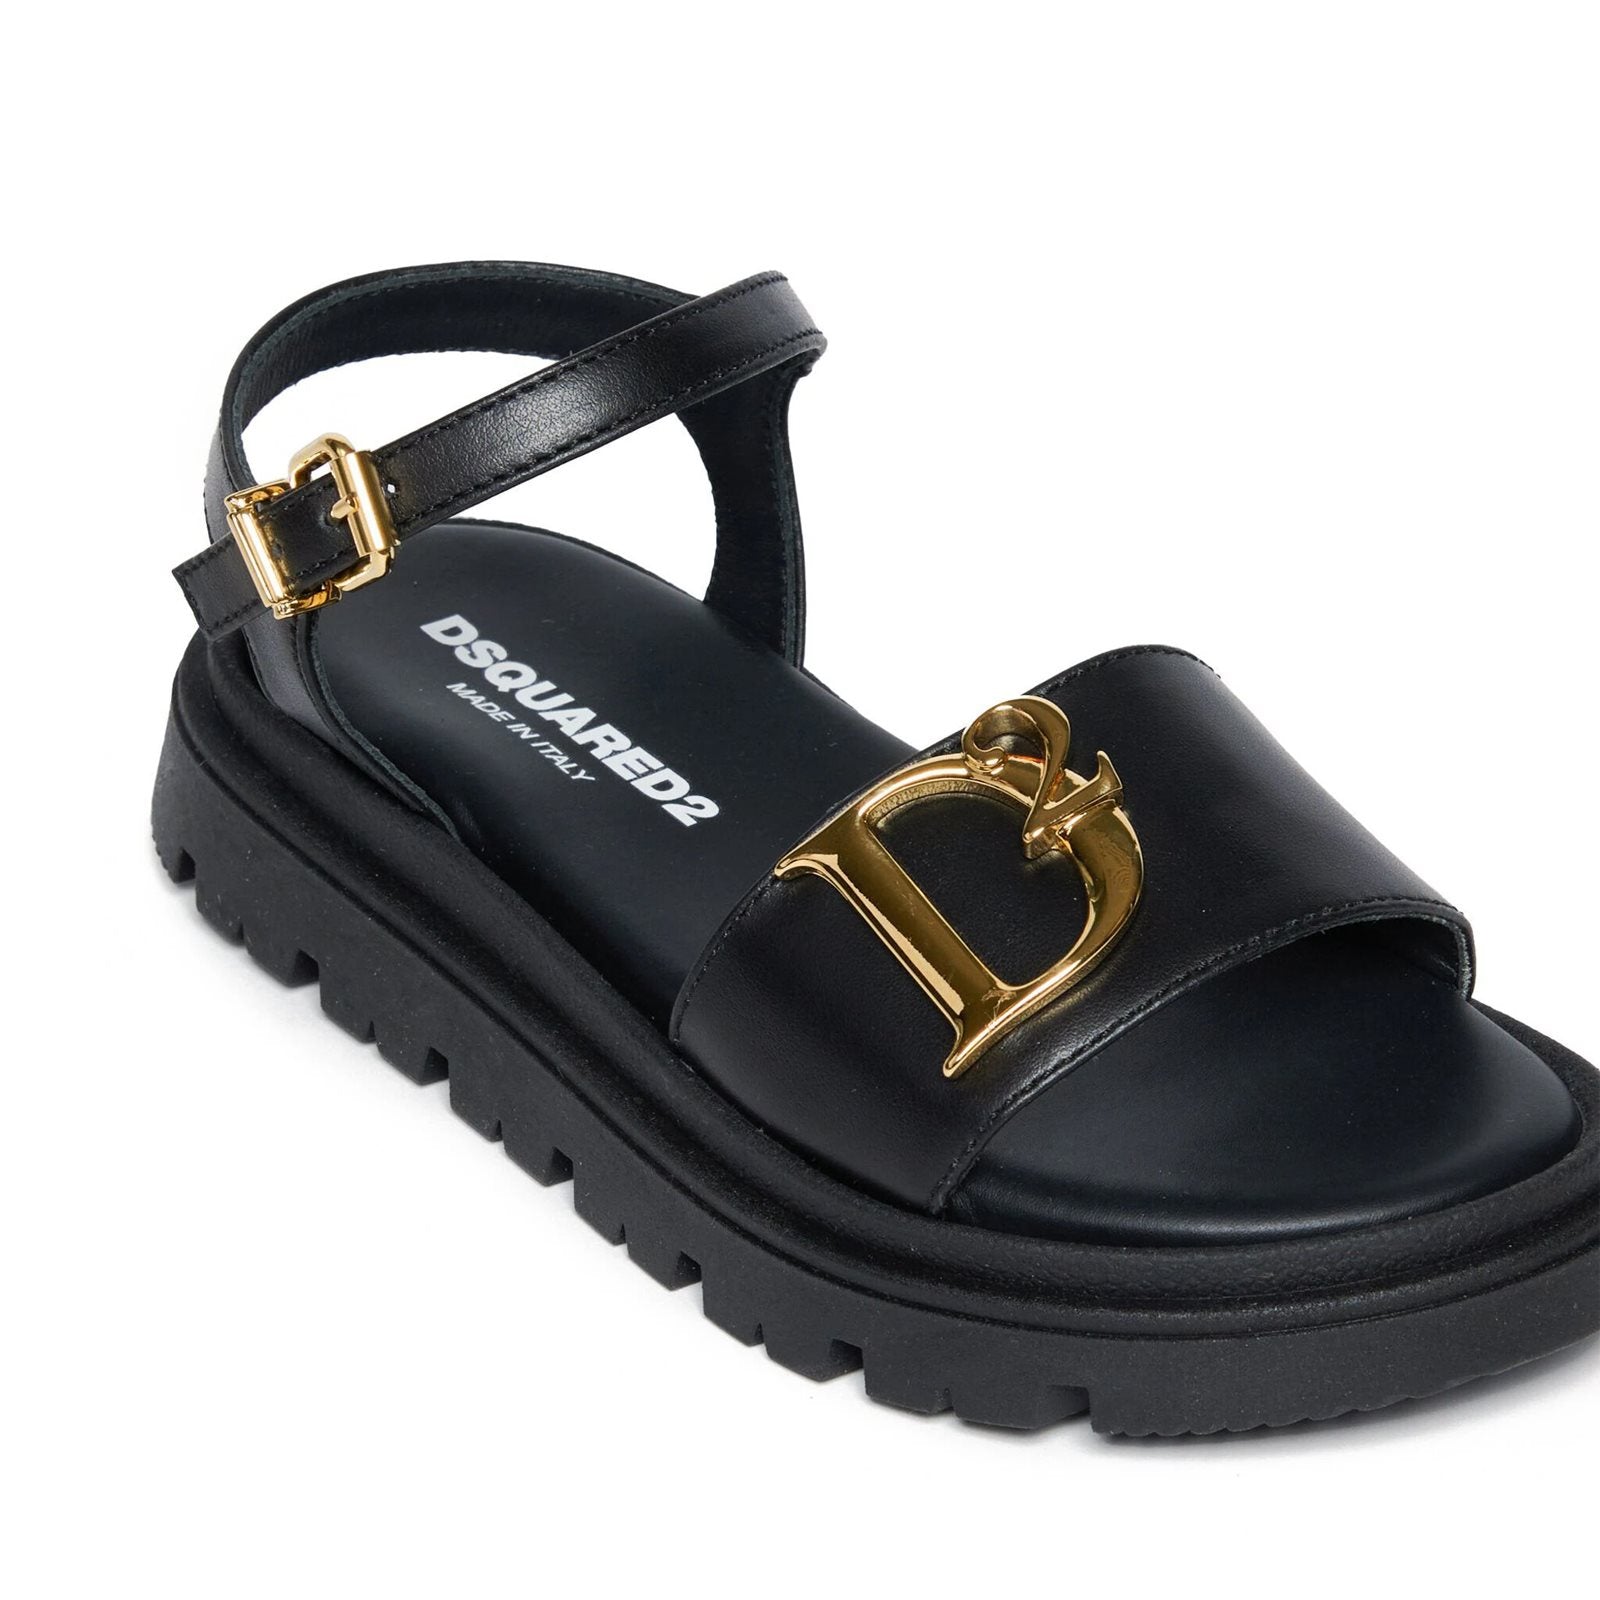 Buckle logo ankle sandals